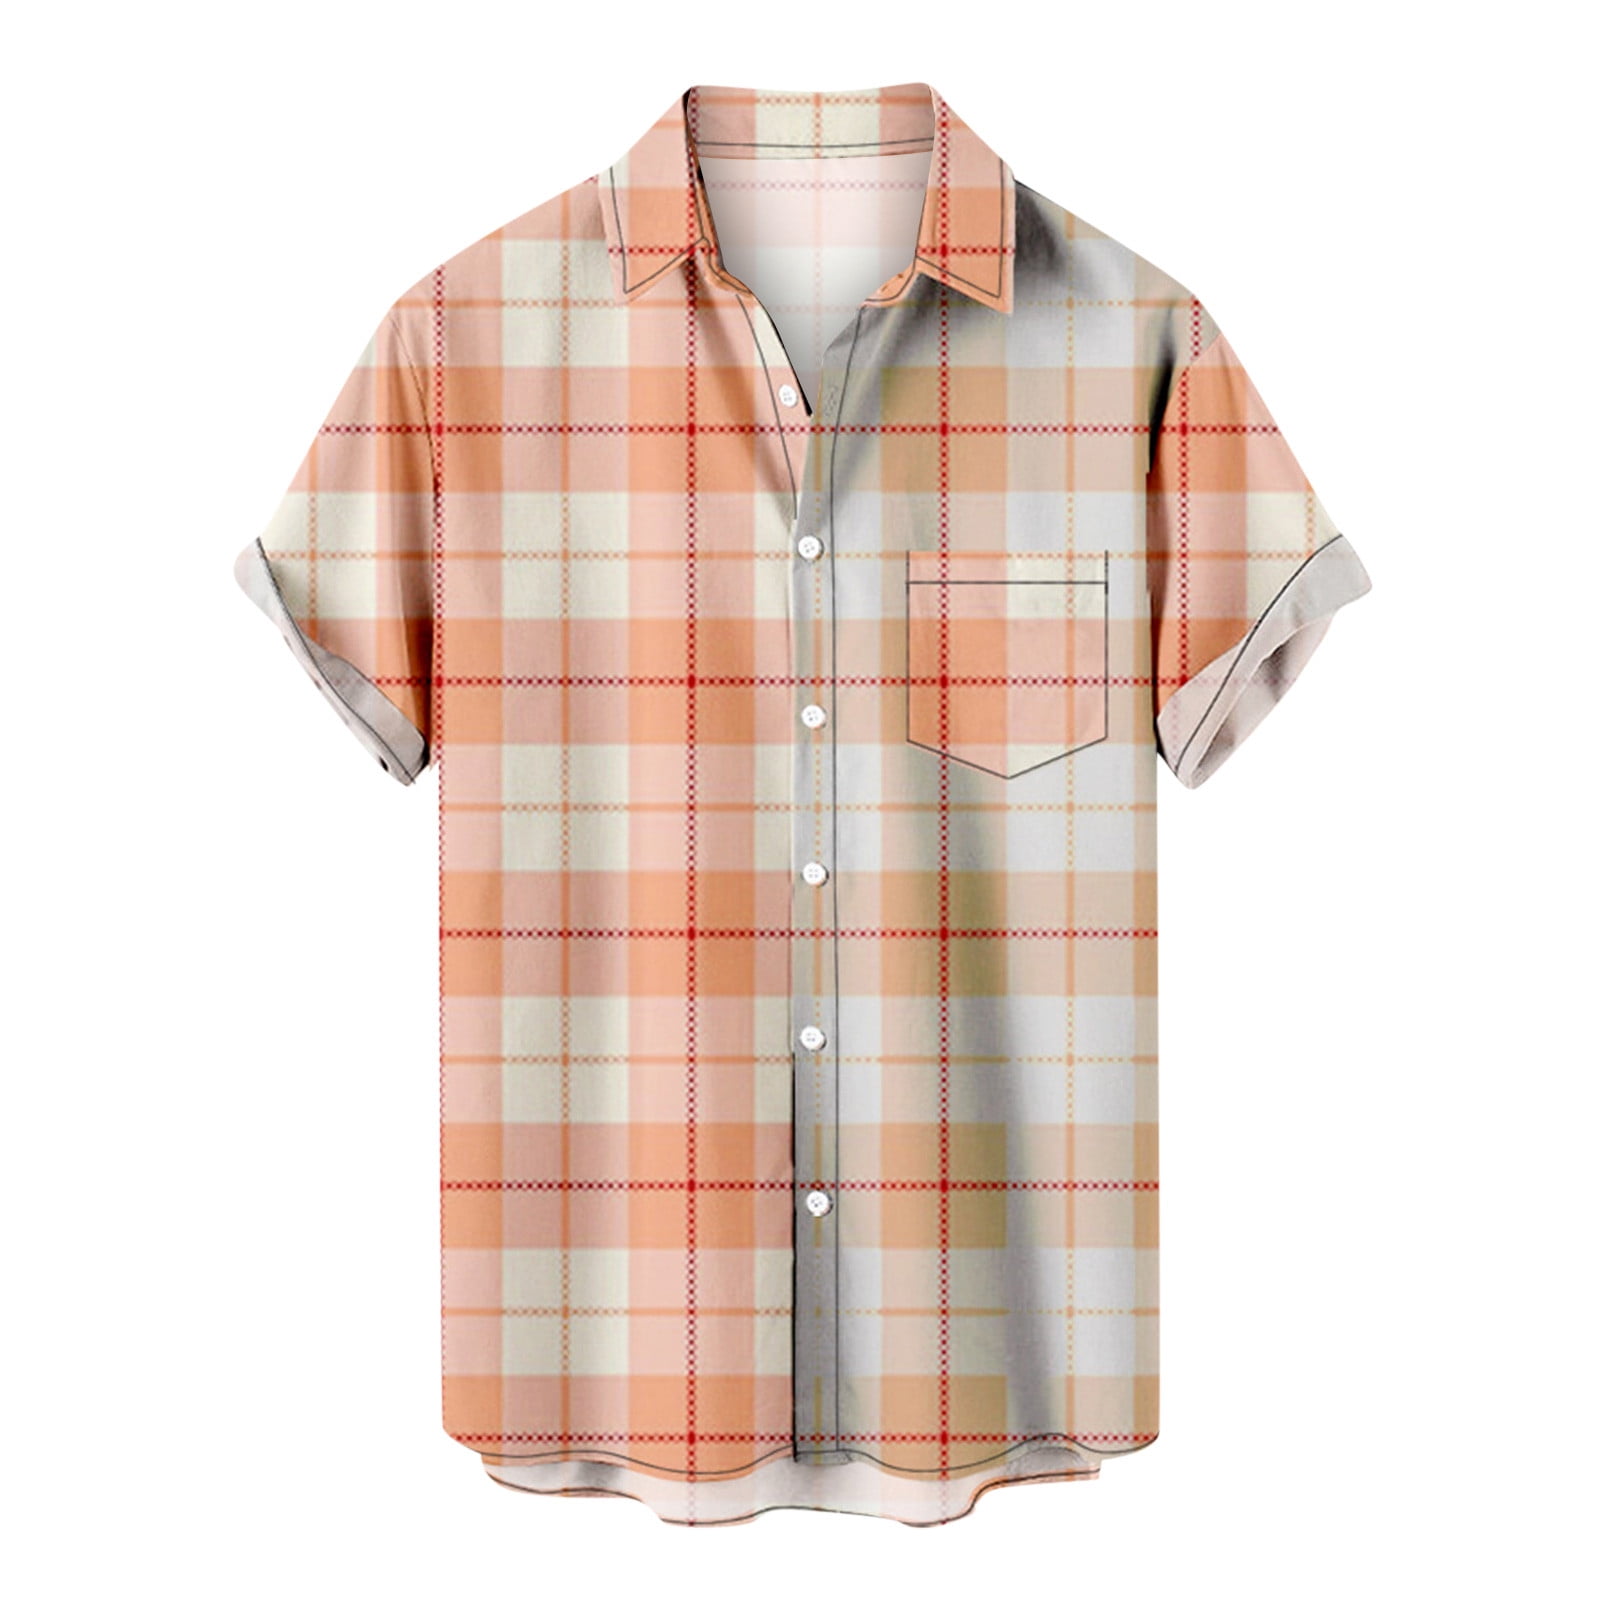 YYDGH Men's Plaid Dress Shirt Classic Fit Casual Short Sleeve Button Down  Shirts with Pocket Orange L 